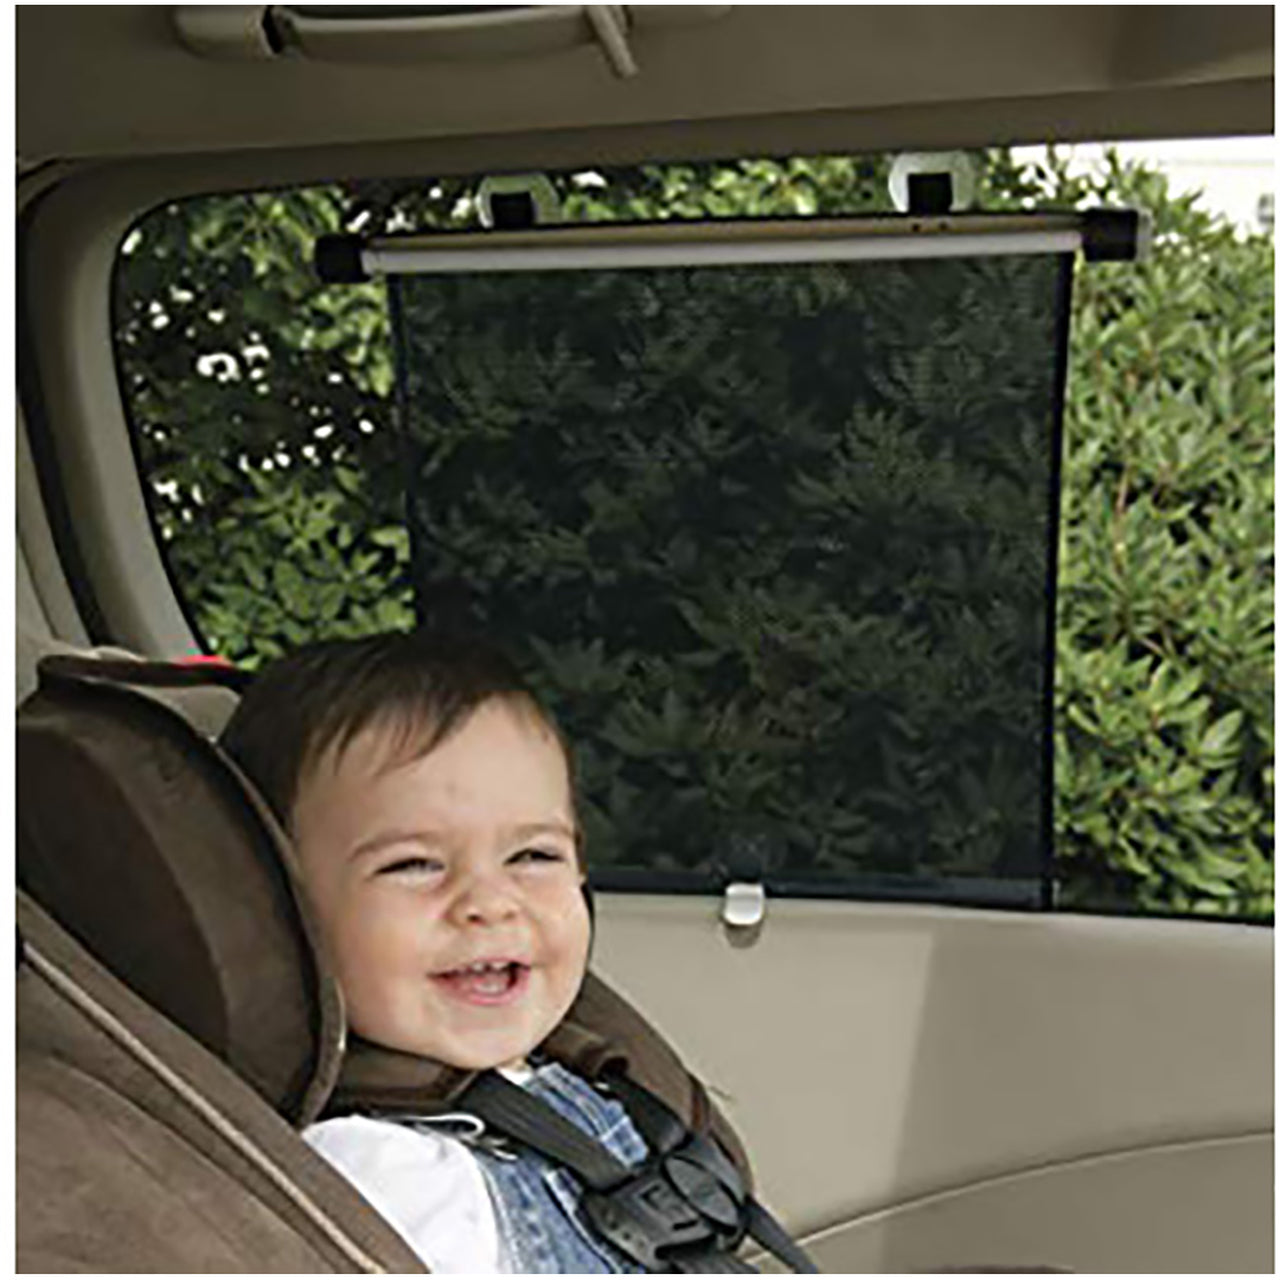 Safety 1st Deluxe Roller Shade 2 Pack - Happy Baby